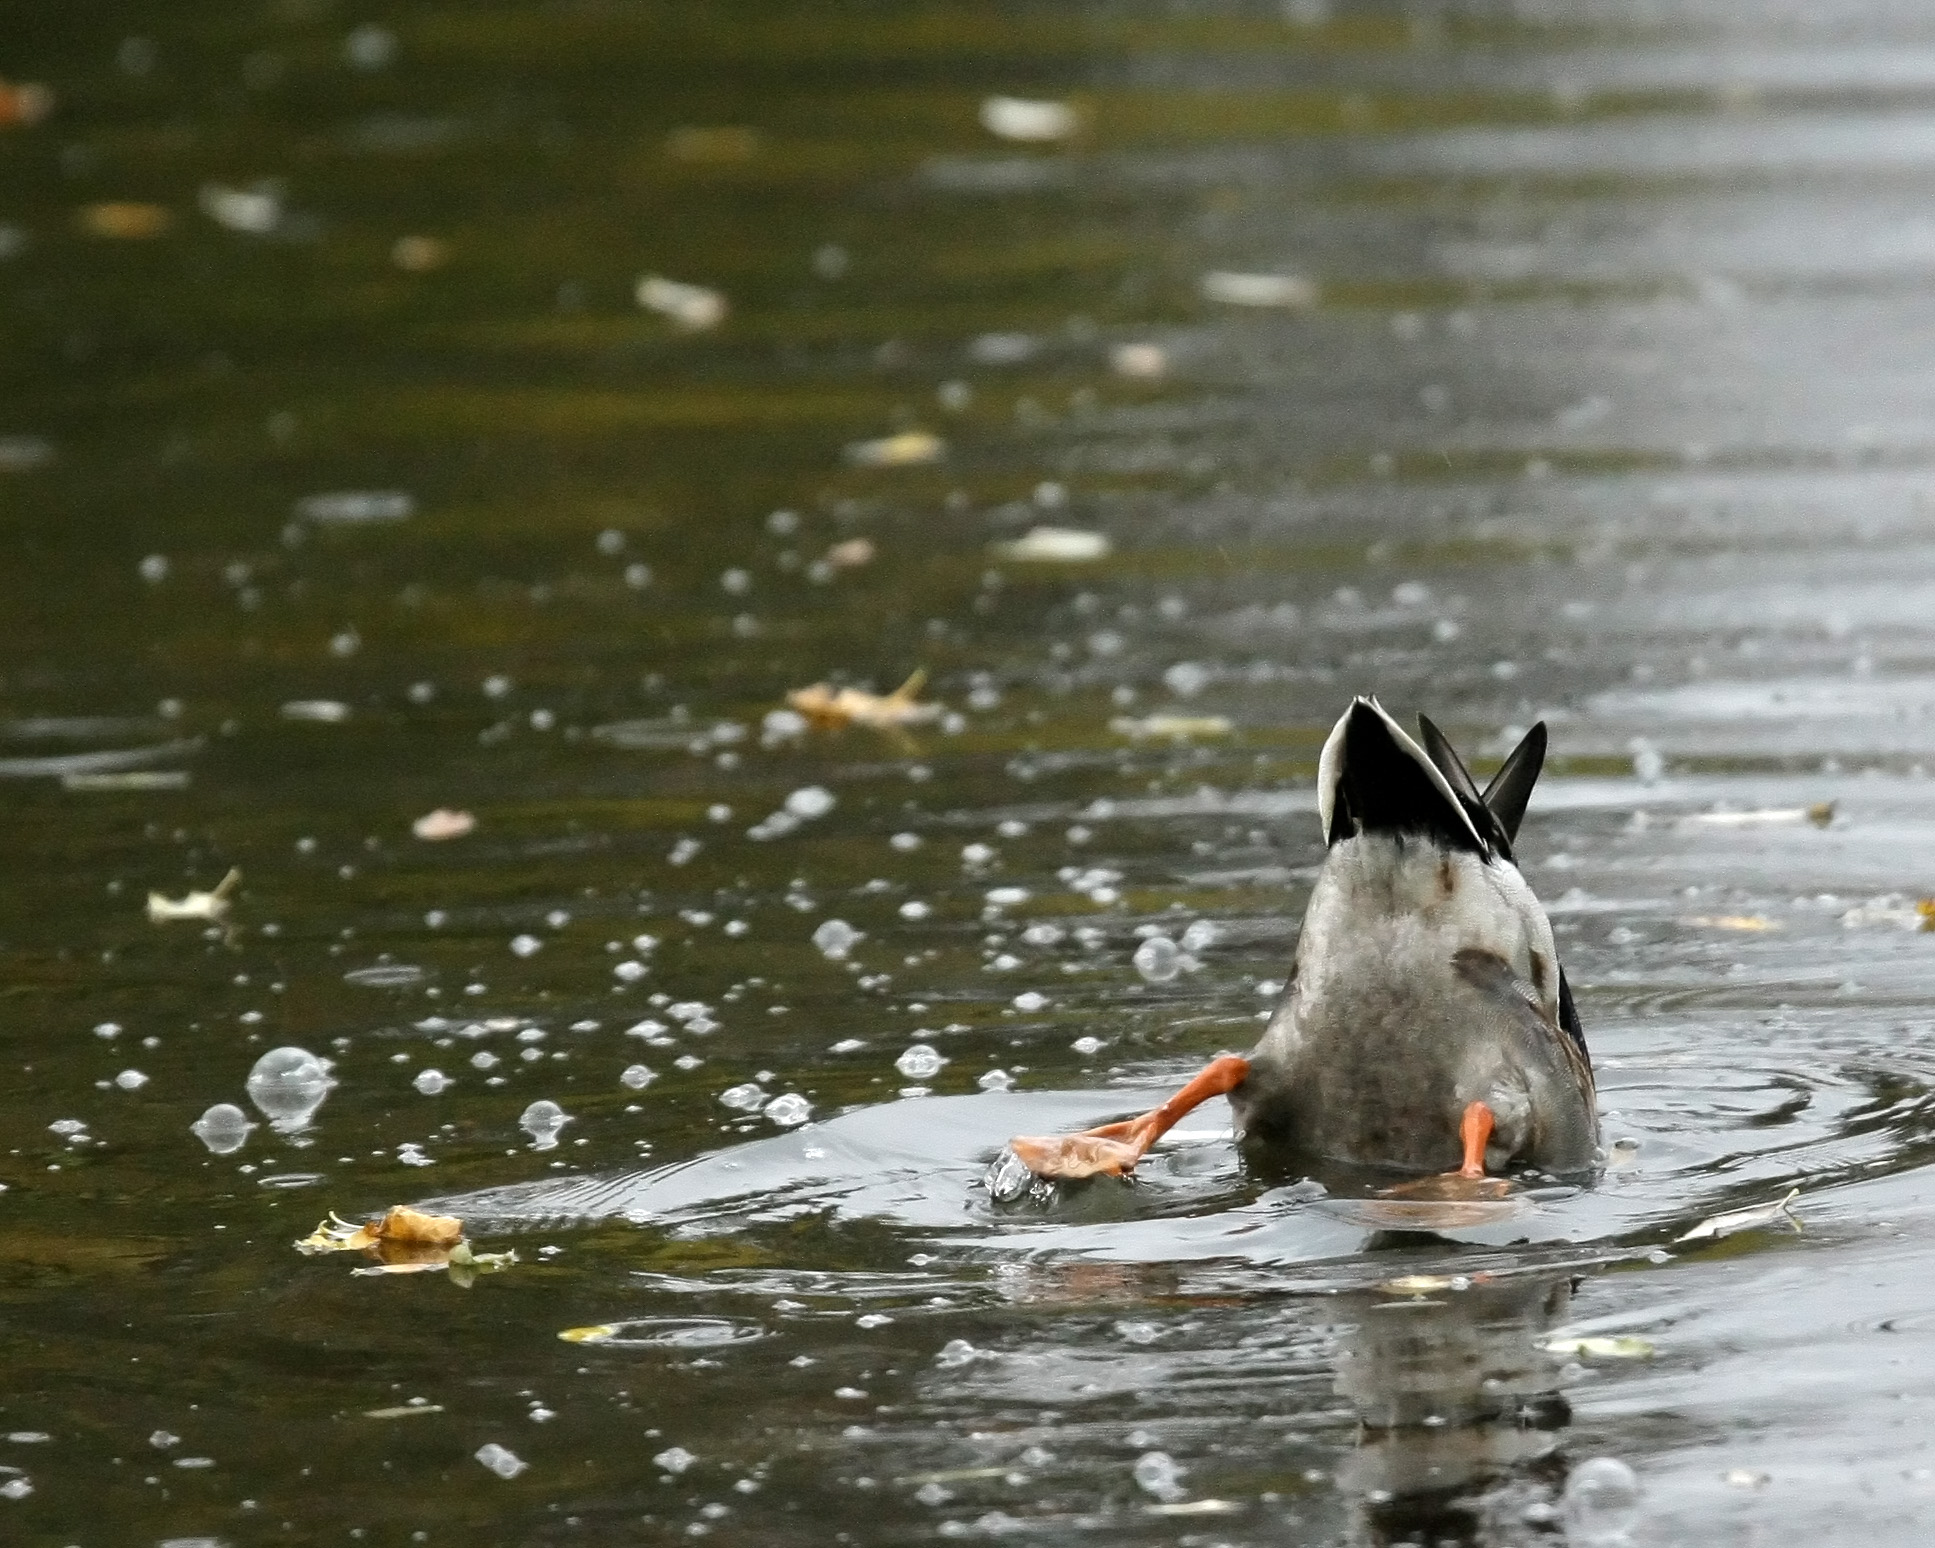 a duck with its head in the water